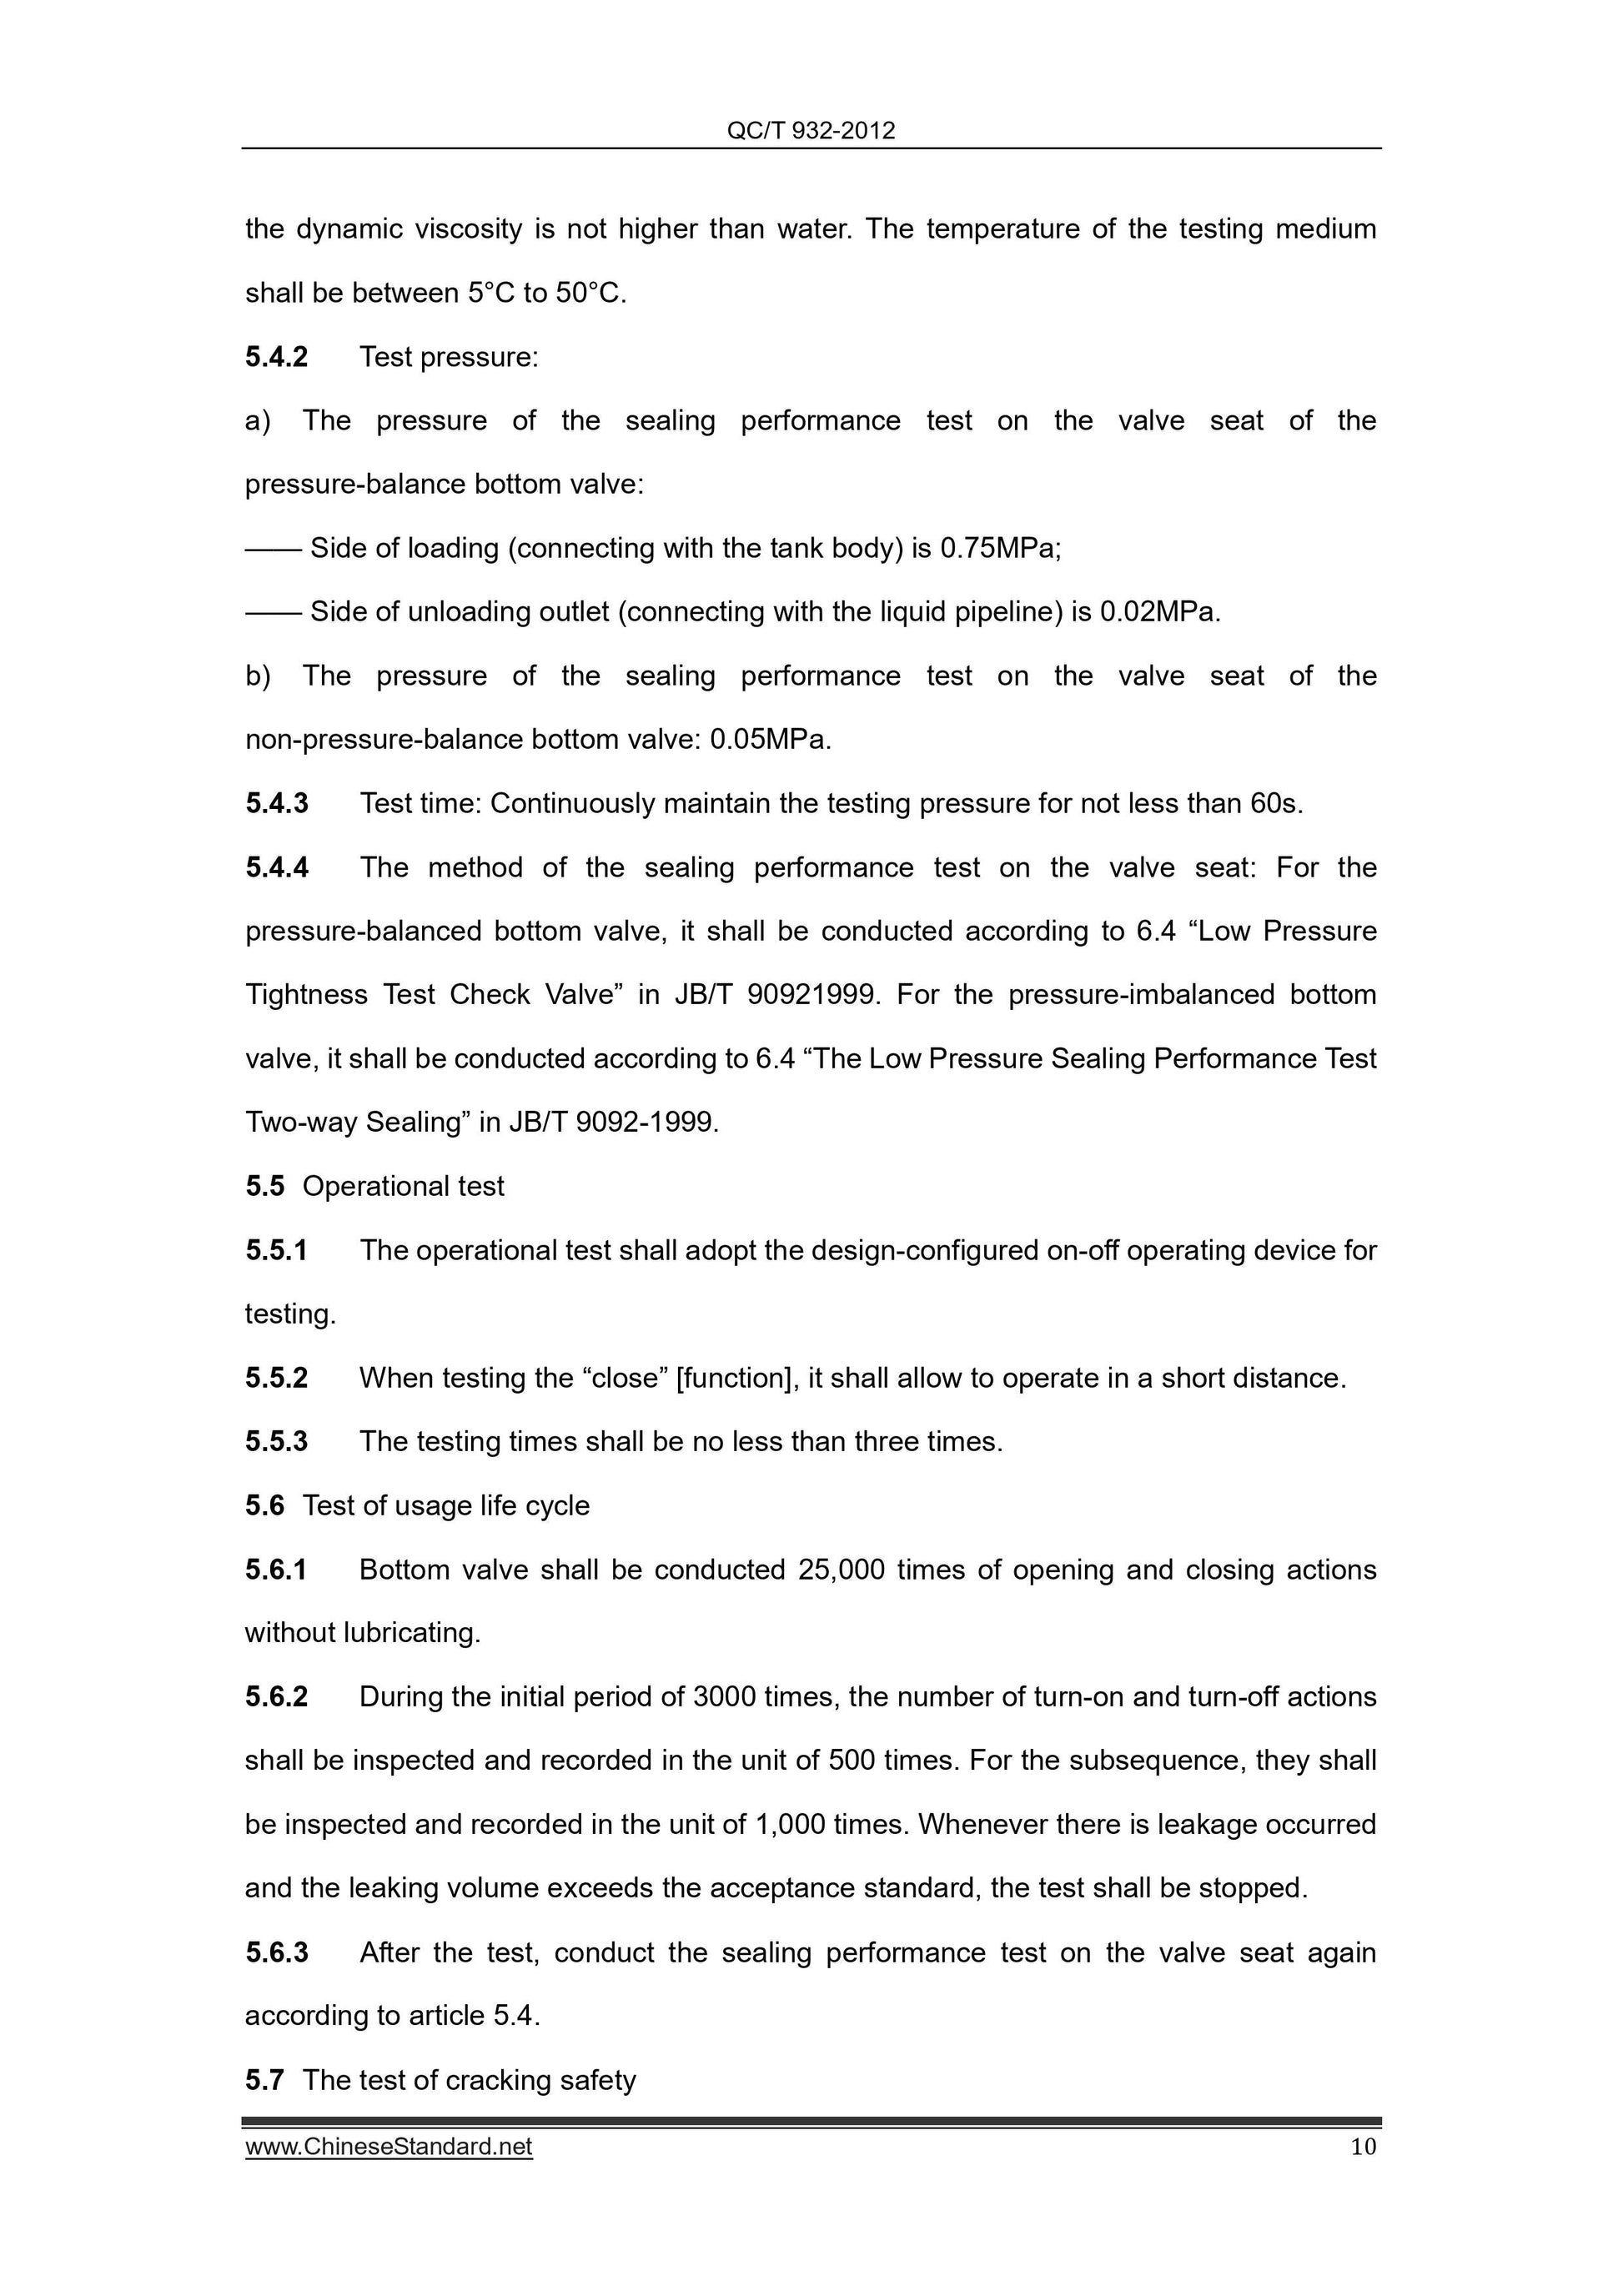 QC/T 932-2012 Page 12